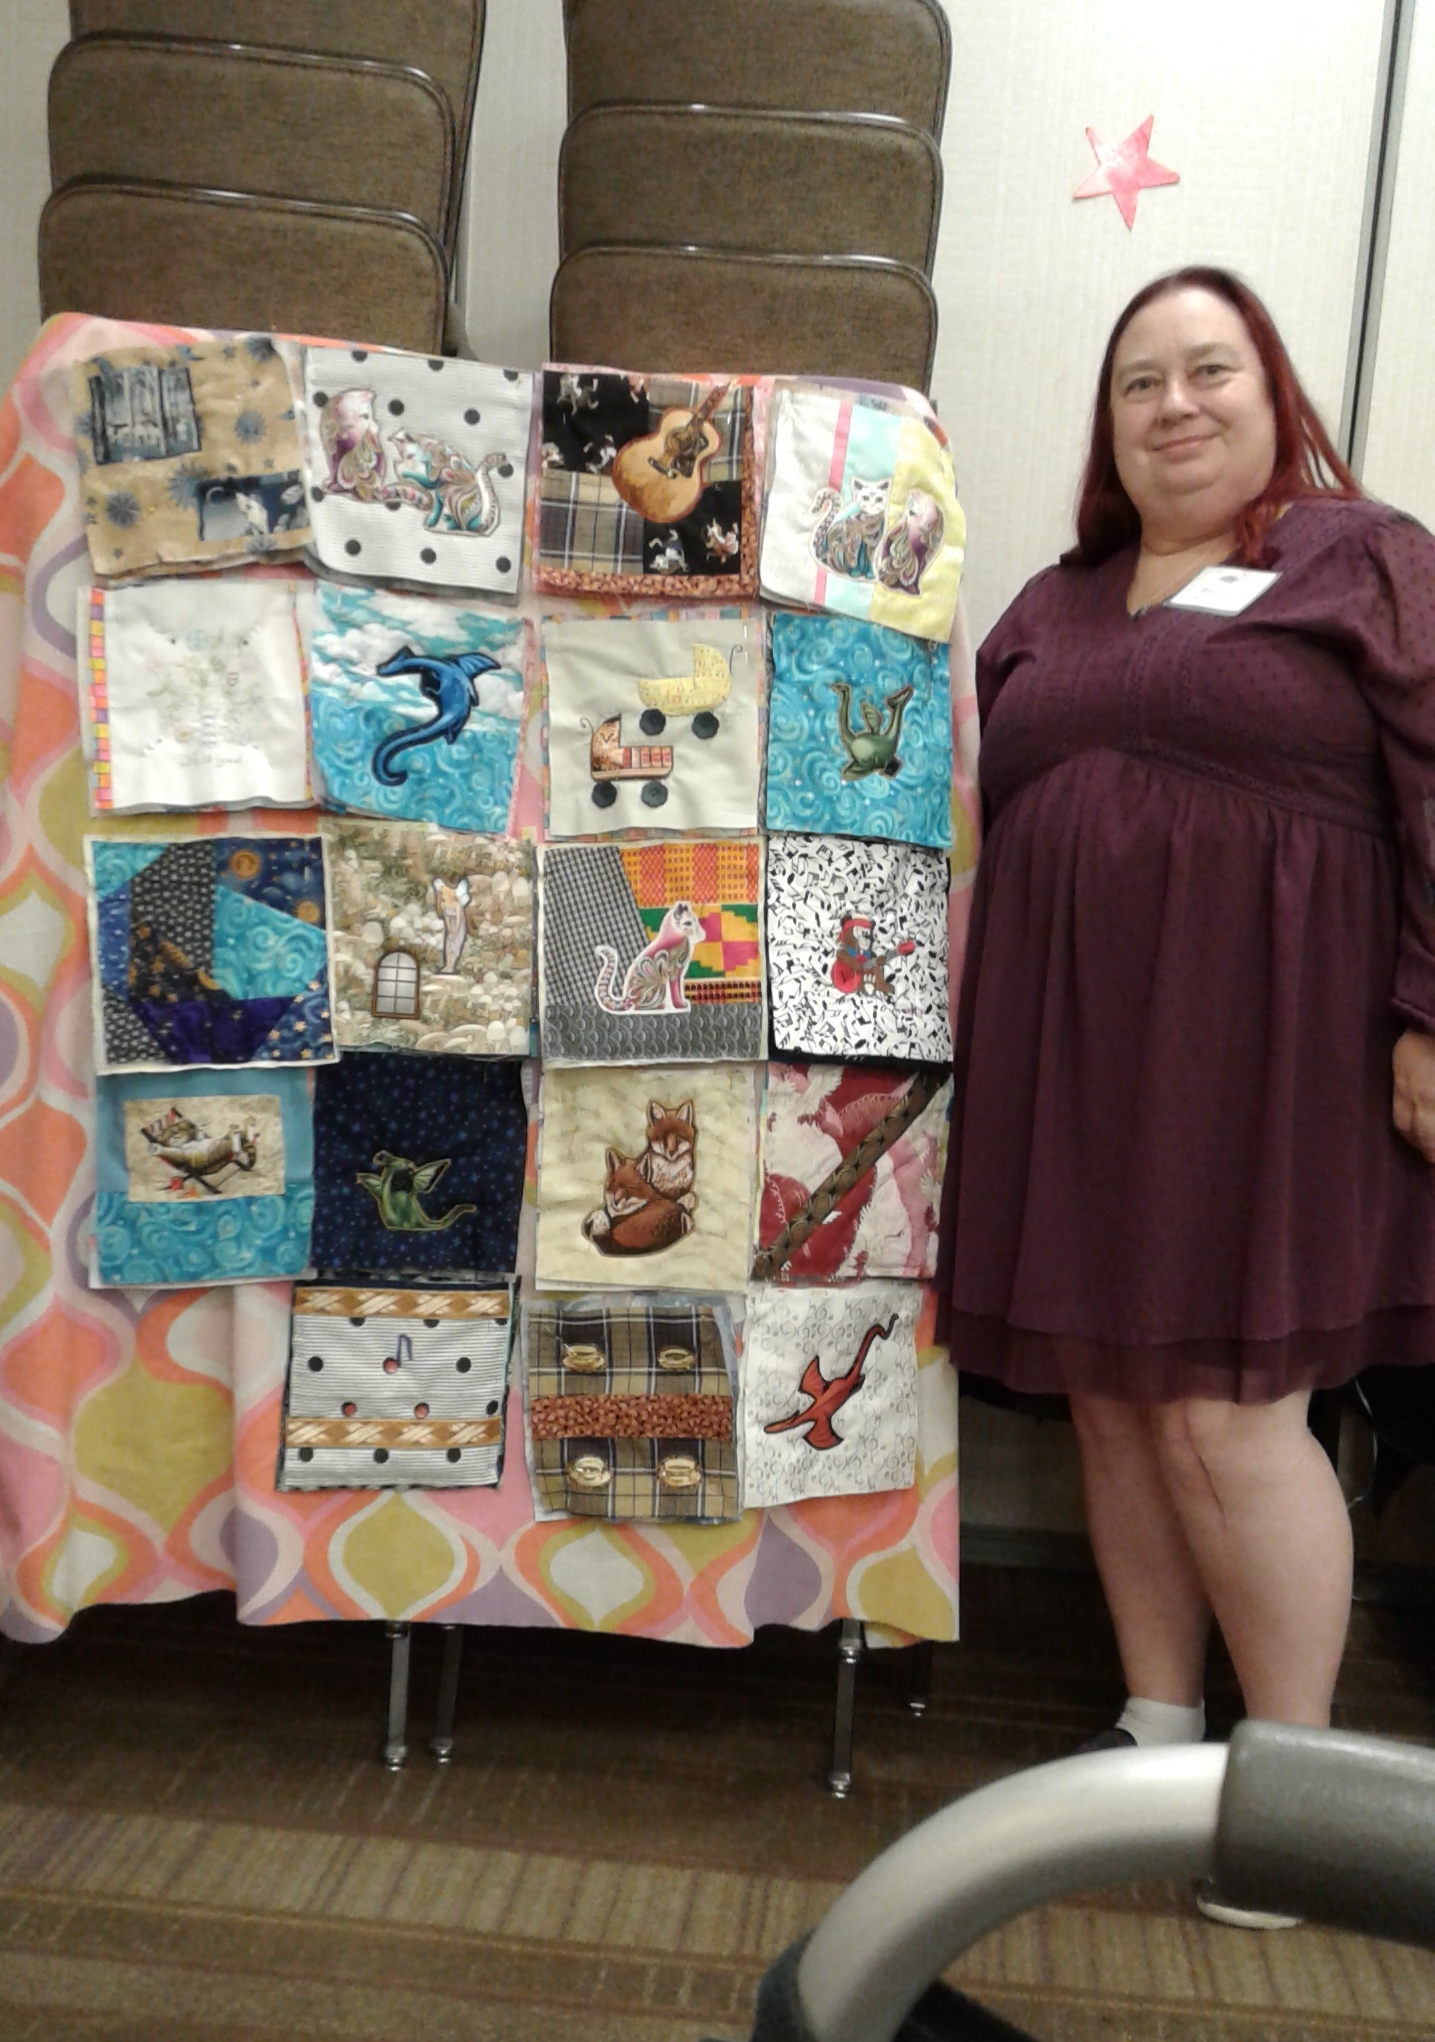 Winner Blanche Moakes with incomplete quilt